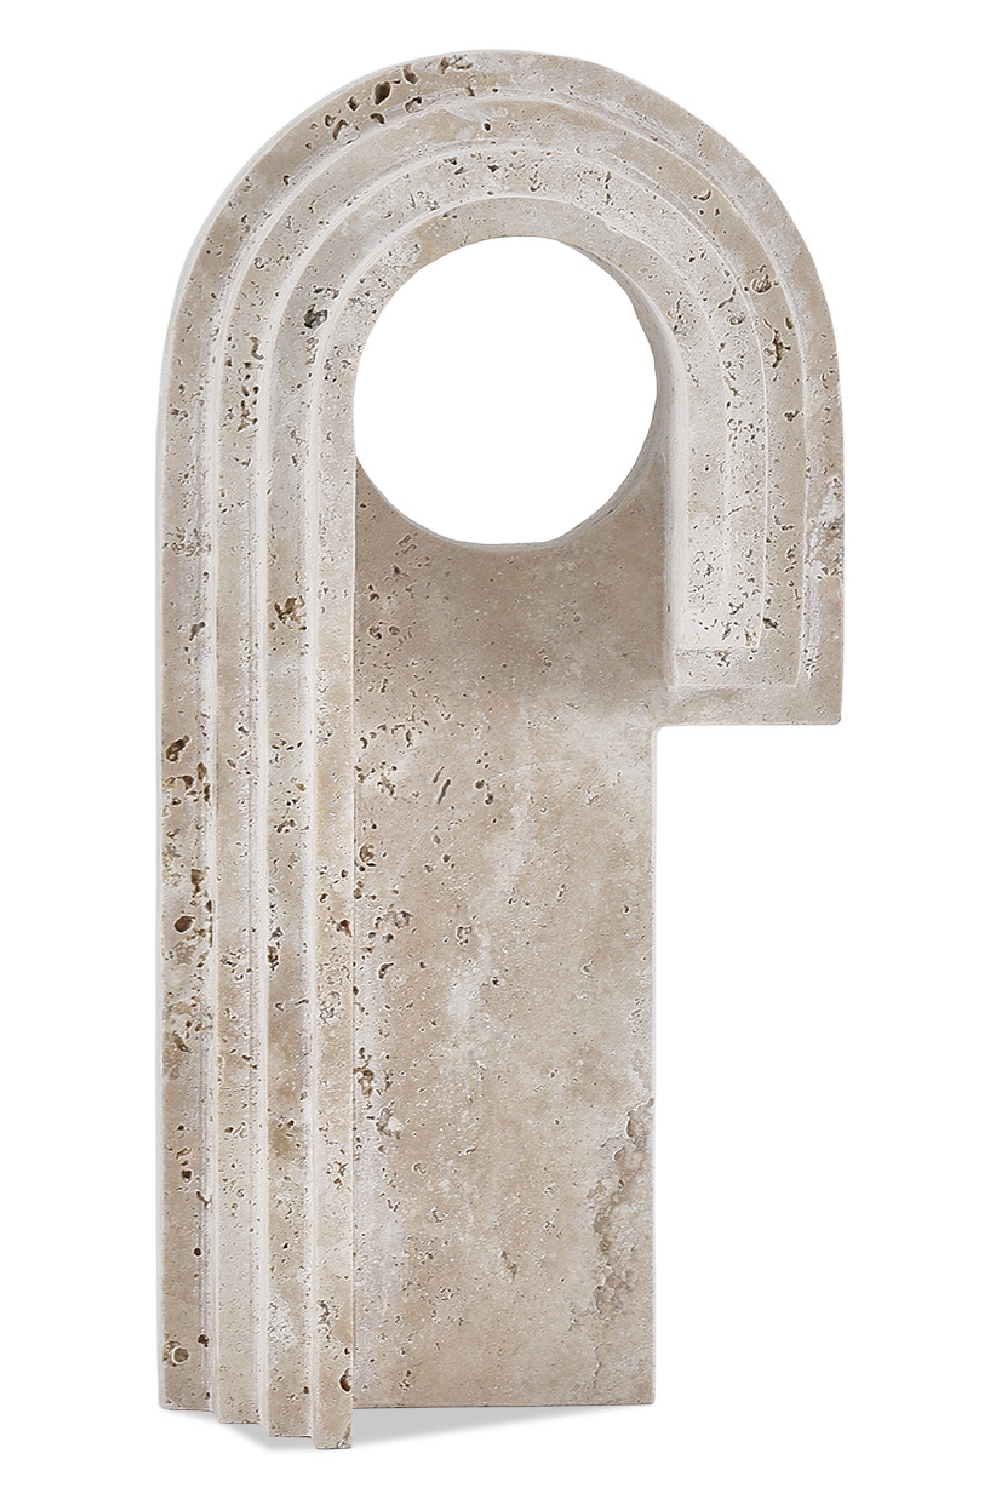 Beige Travertine Arched Marble | Liang & Eimil Toccino | Oroa.com